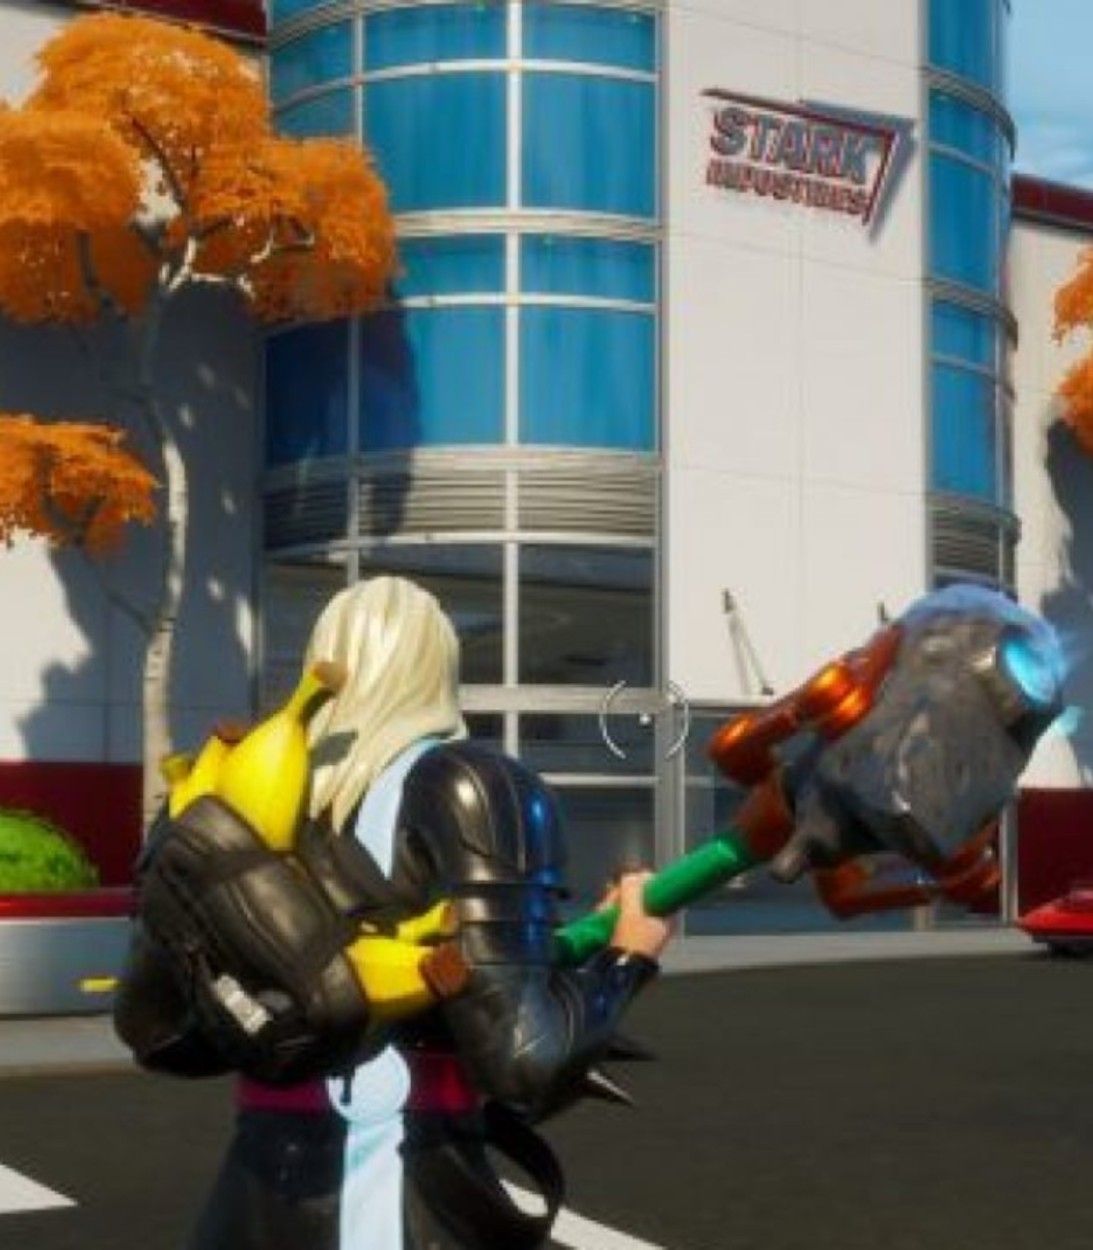 A player dressed as Thor stands outside the new Stark Industries POI in Fortnite Season 4